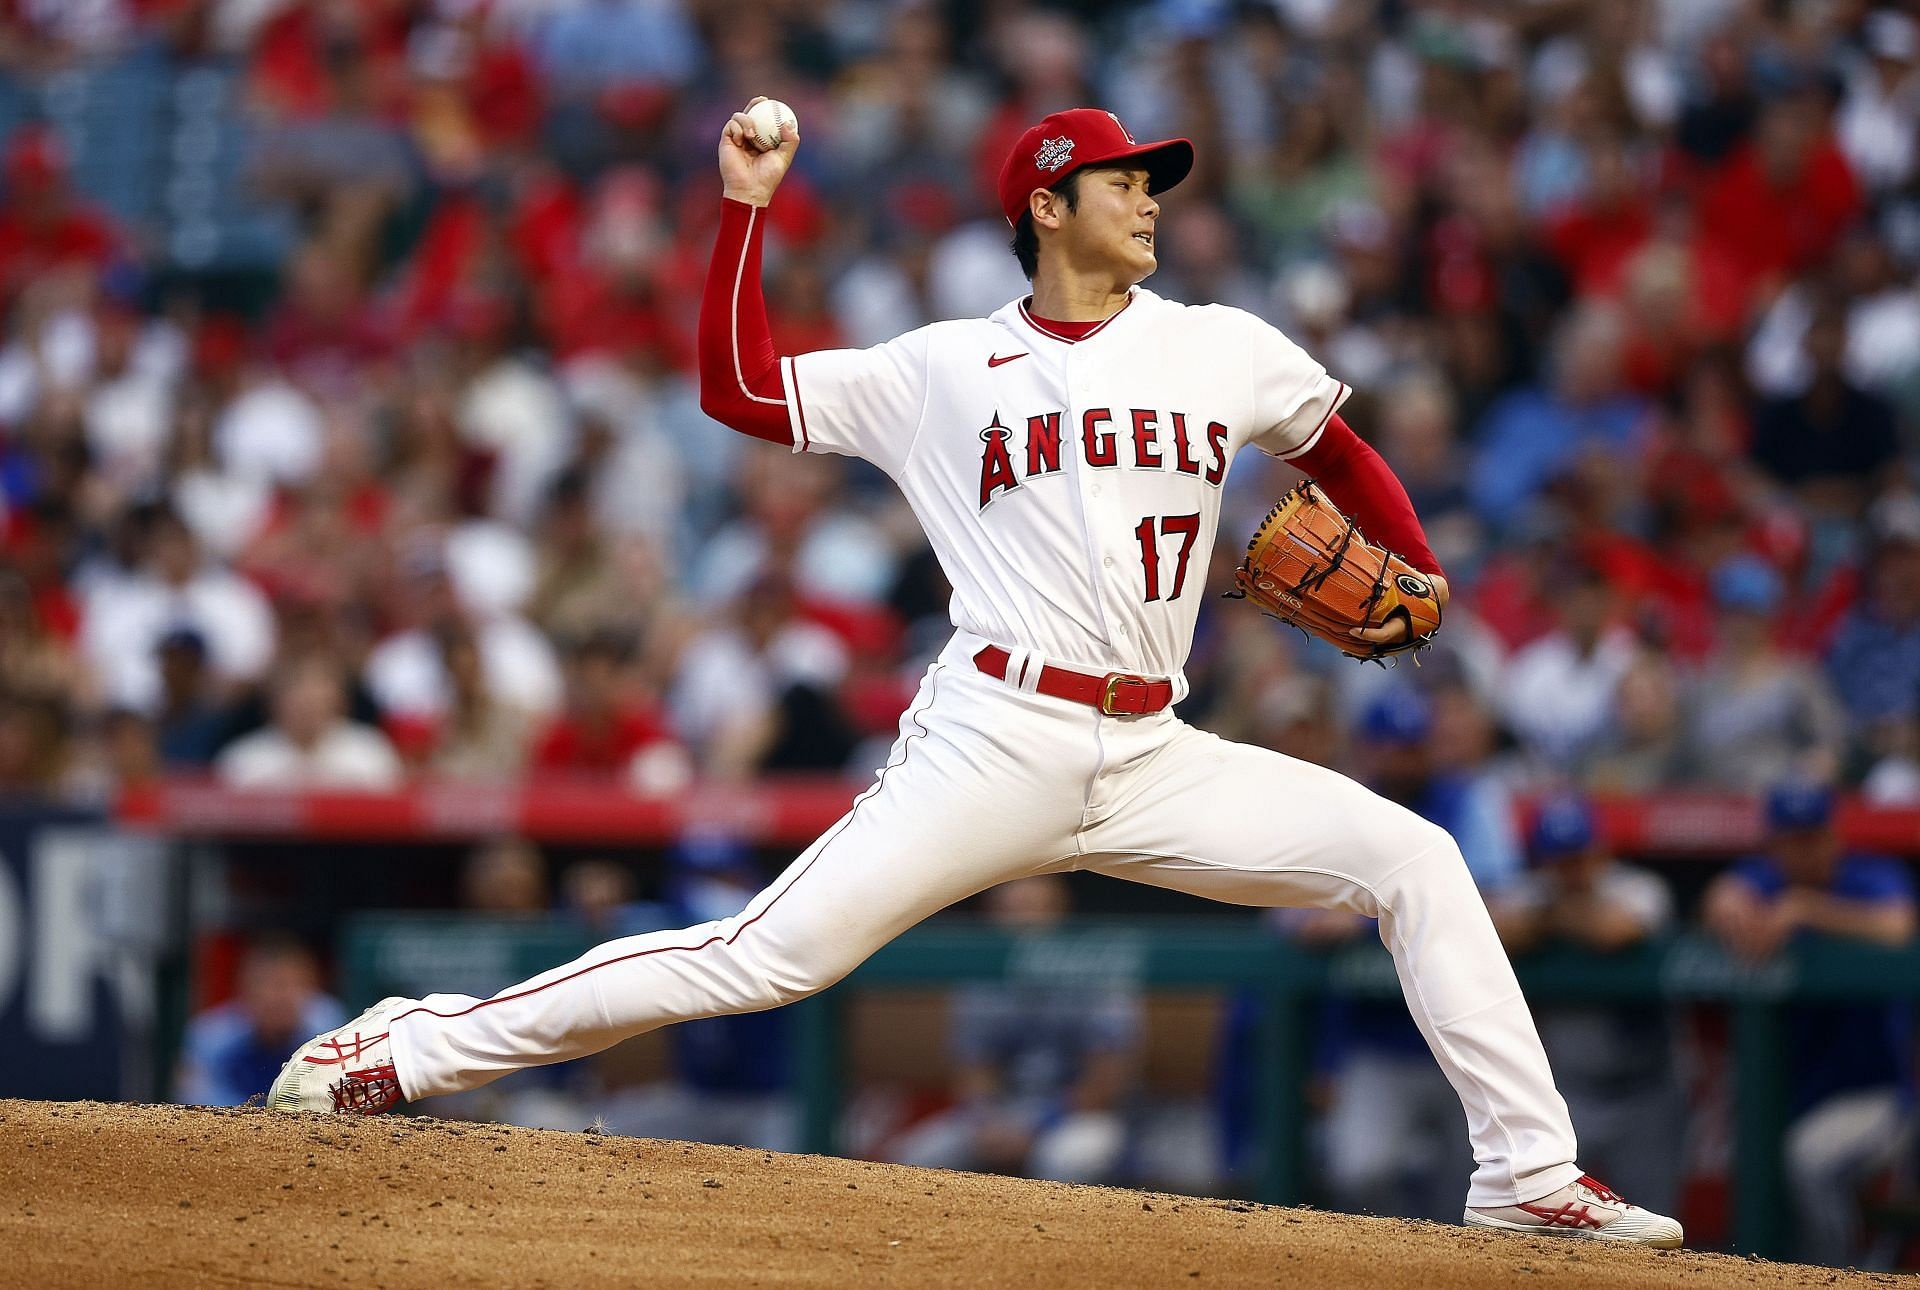 Los Angeles Angels (Sports), I thought about taking him out, 1920x1290 HD Desktop